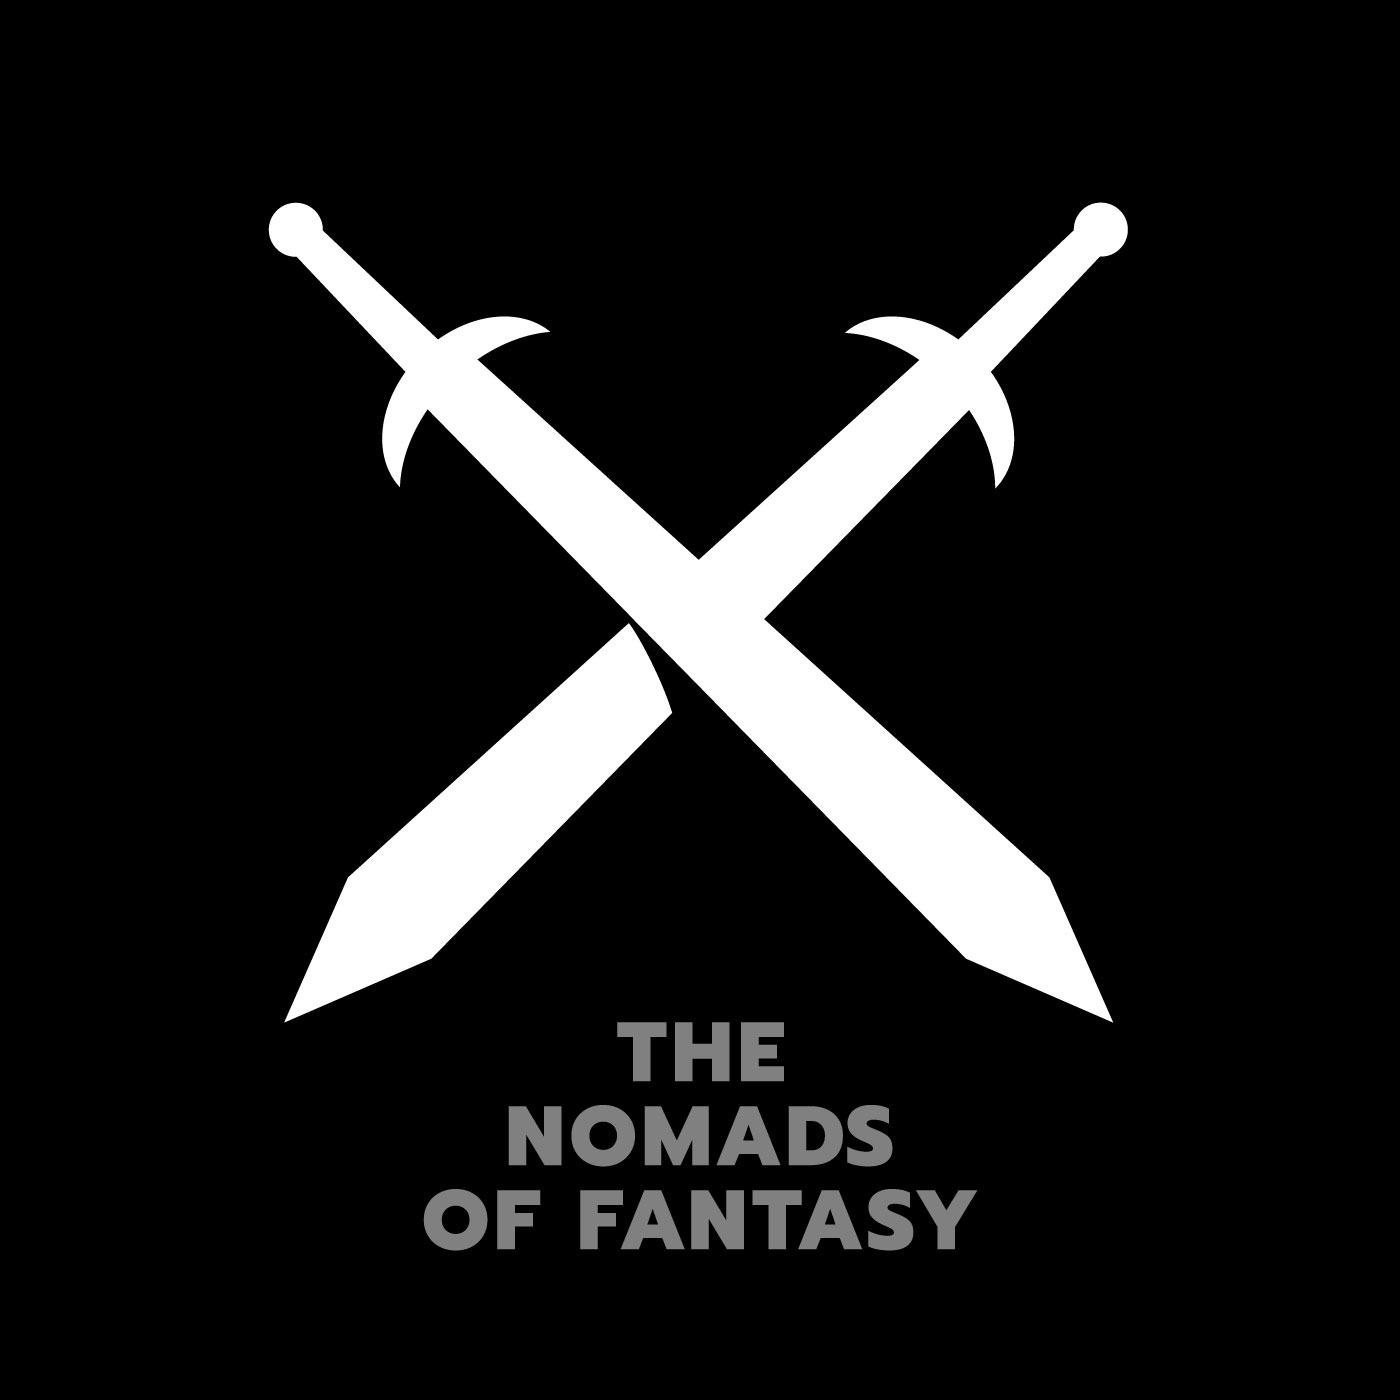 The Nomads of Fantasy